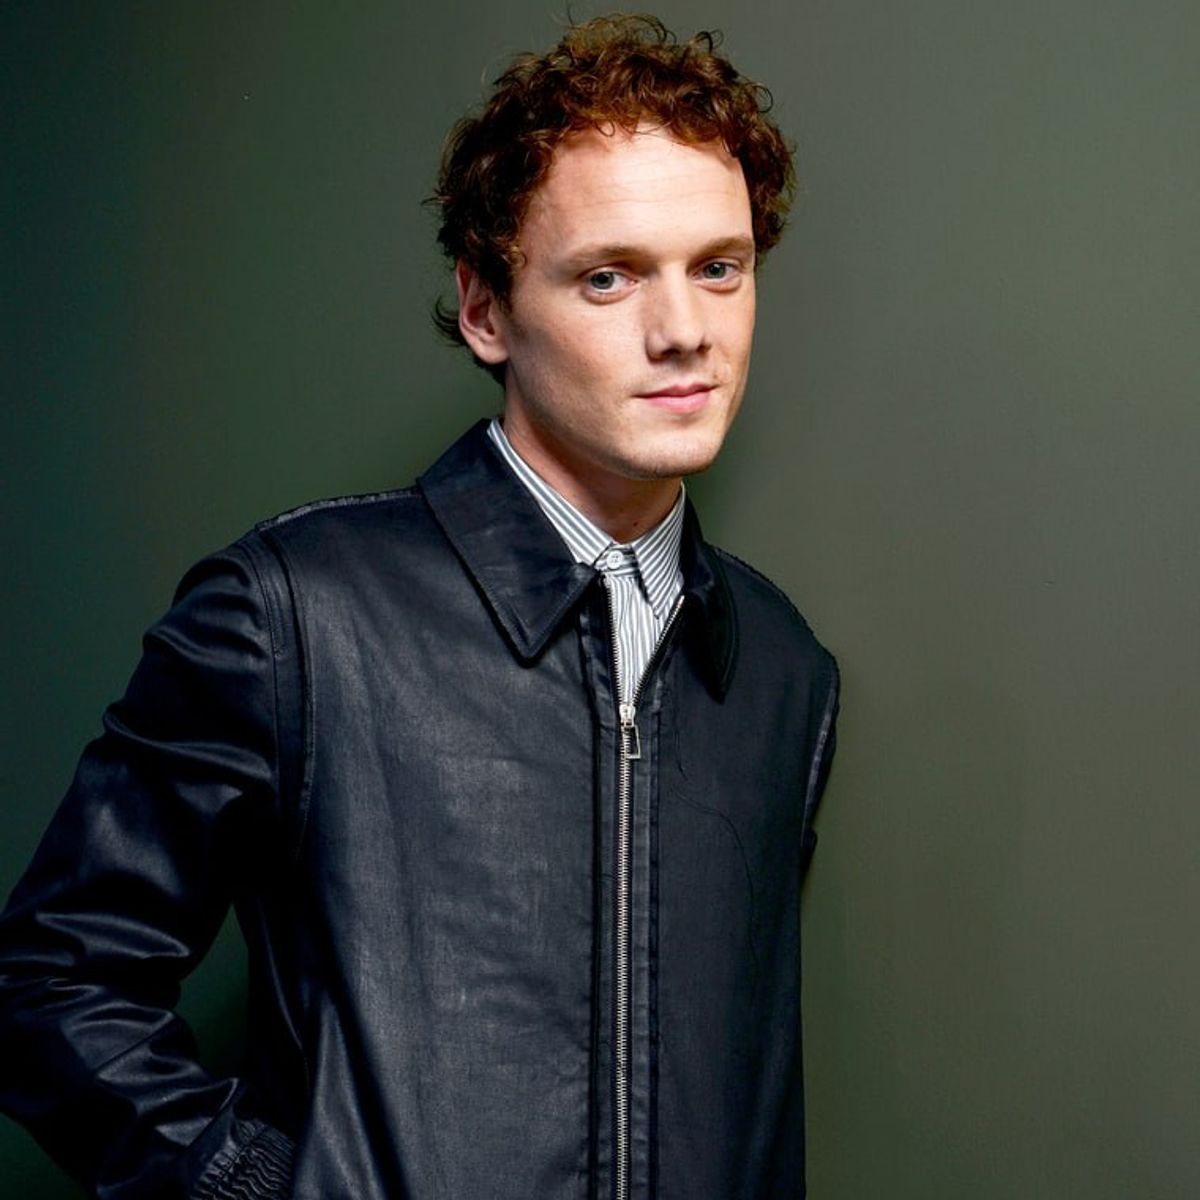 Is Jeep's "Flawed" Design Really Responsible For Anton Yelchin's Death?